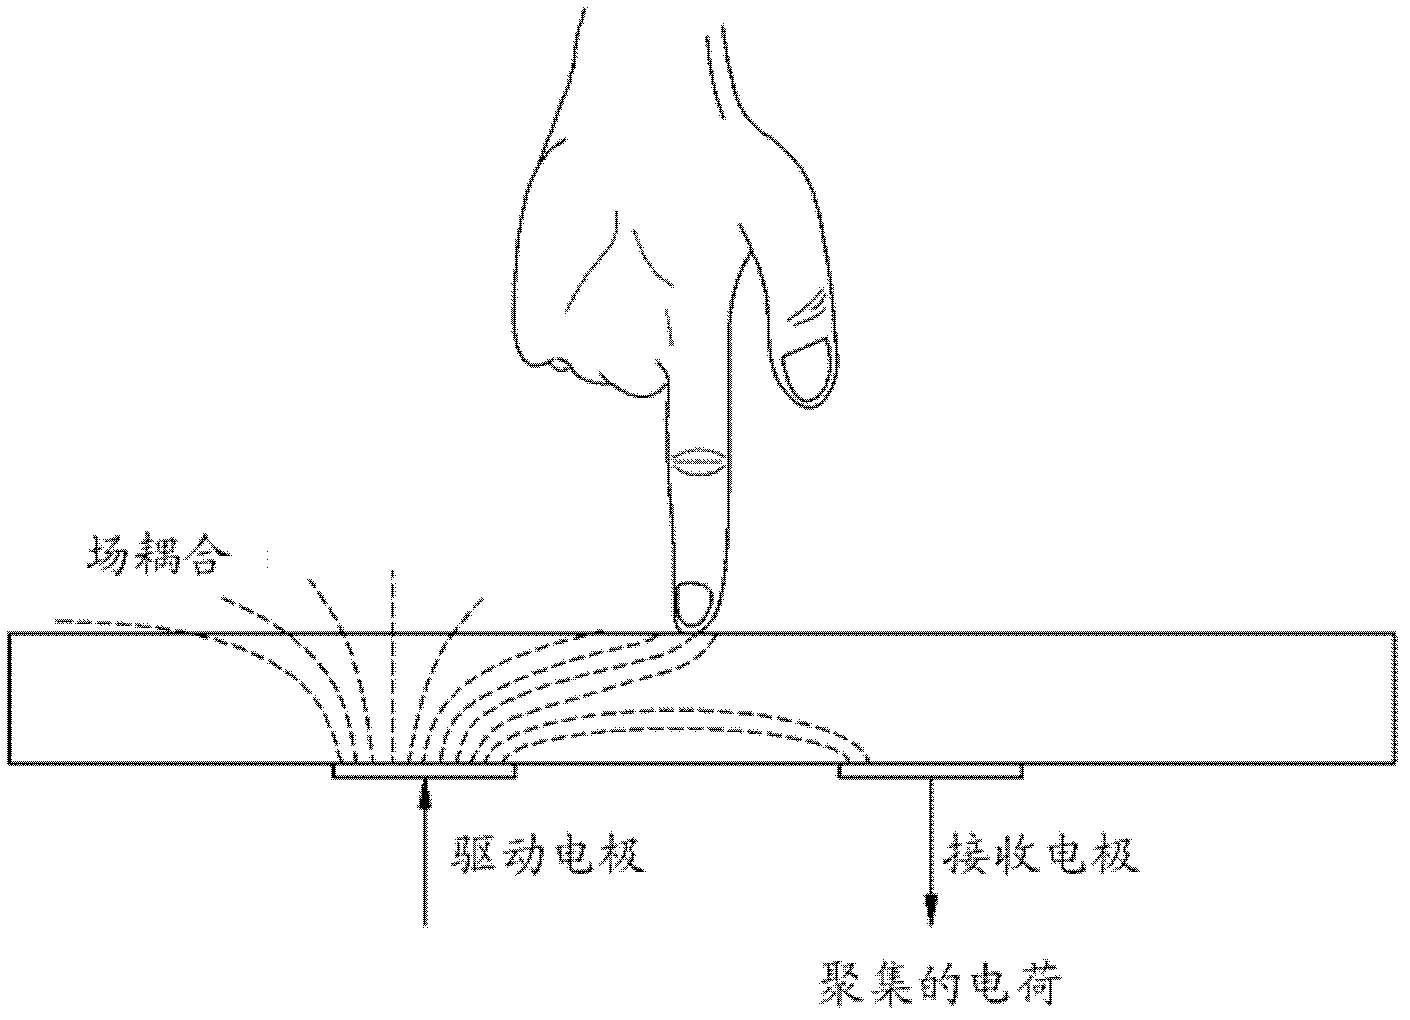 Method and device for correcting touch coordinates in touch system